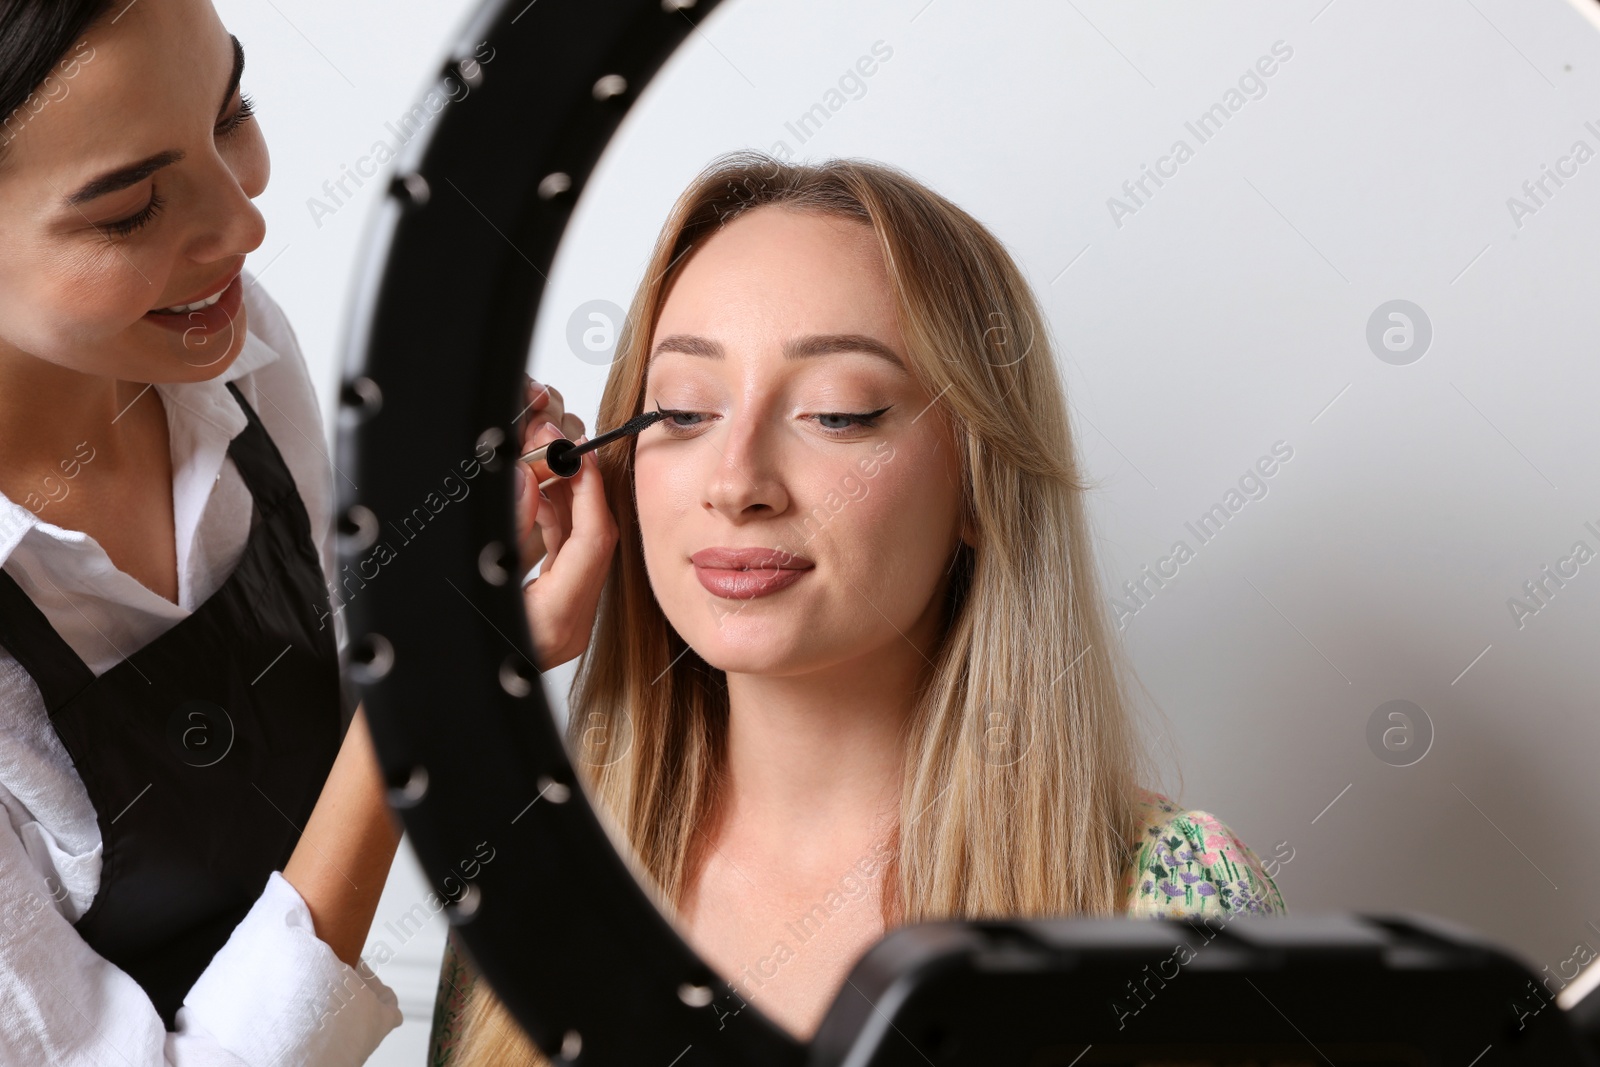 Photo of Professional makeup artist working with beautiful young woman against light background, view through ring lamp